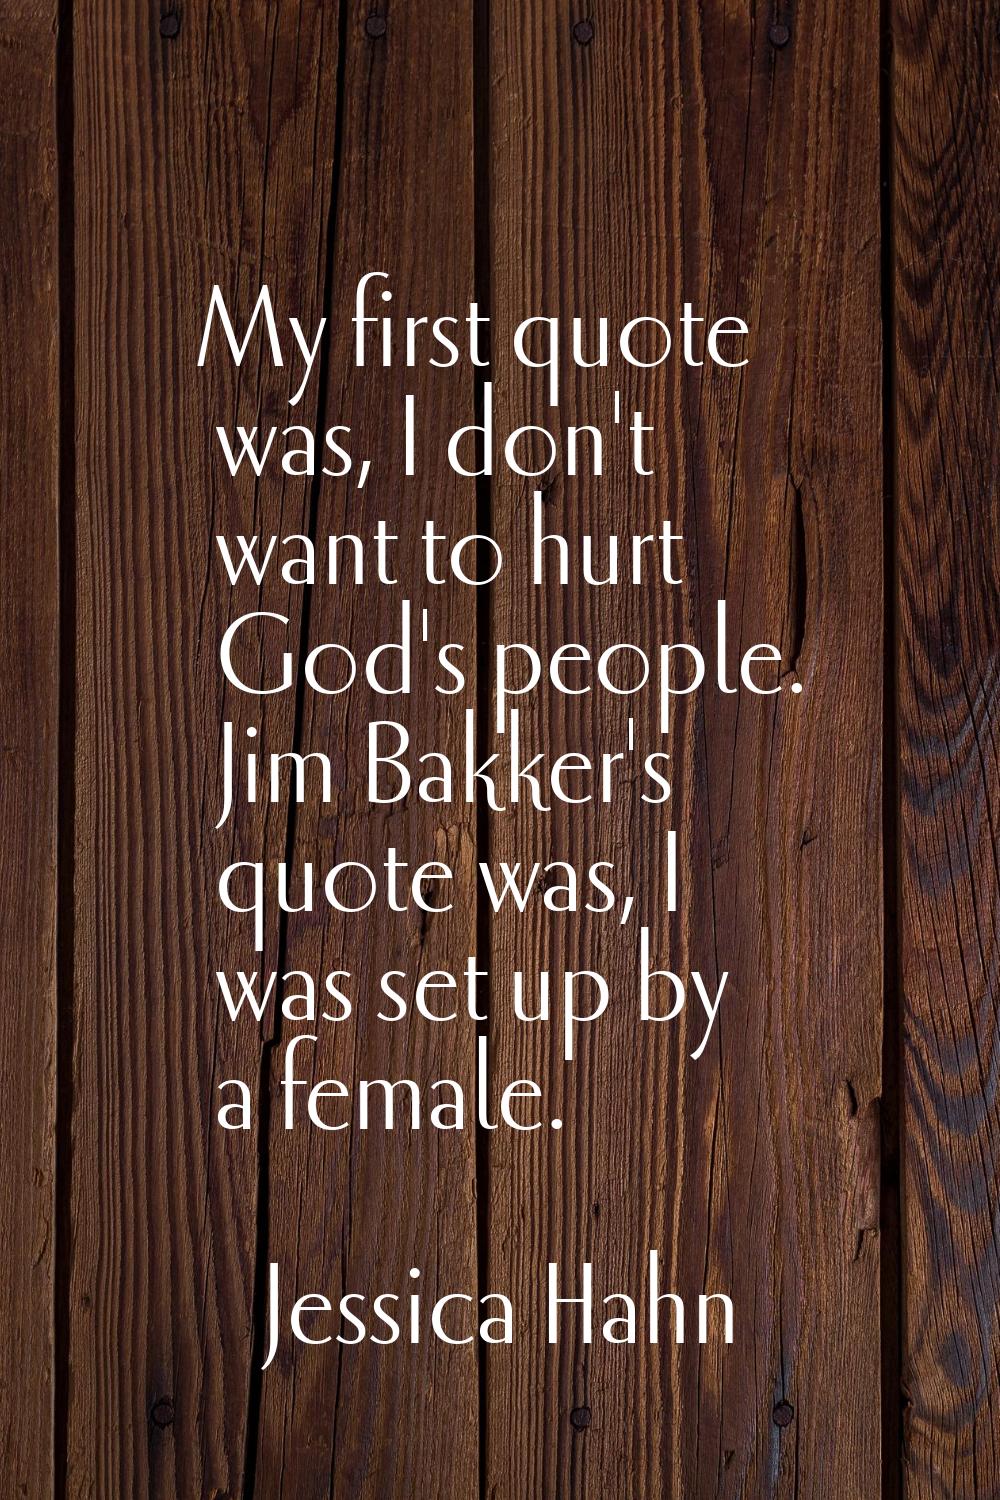 My first quote was, I don't want to hurt God's people. Jim Bakker's quote was, I was set up by a fe